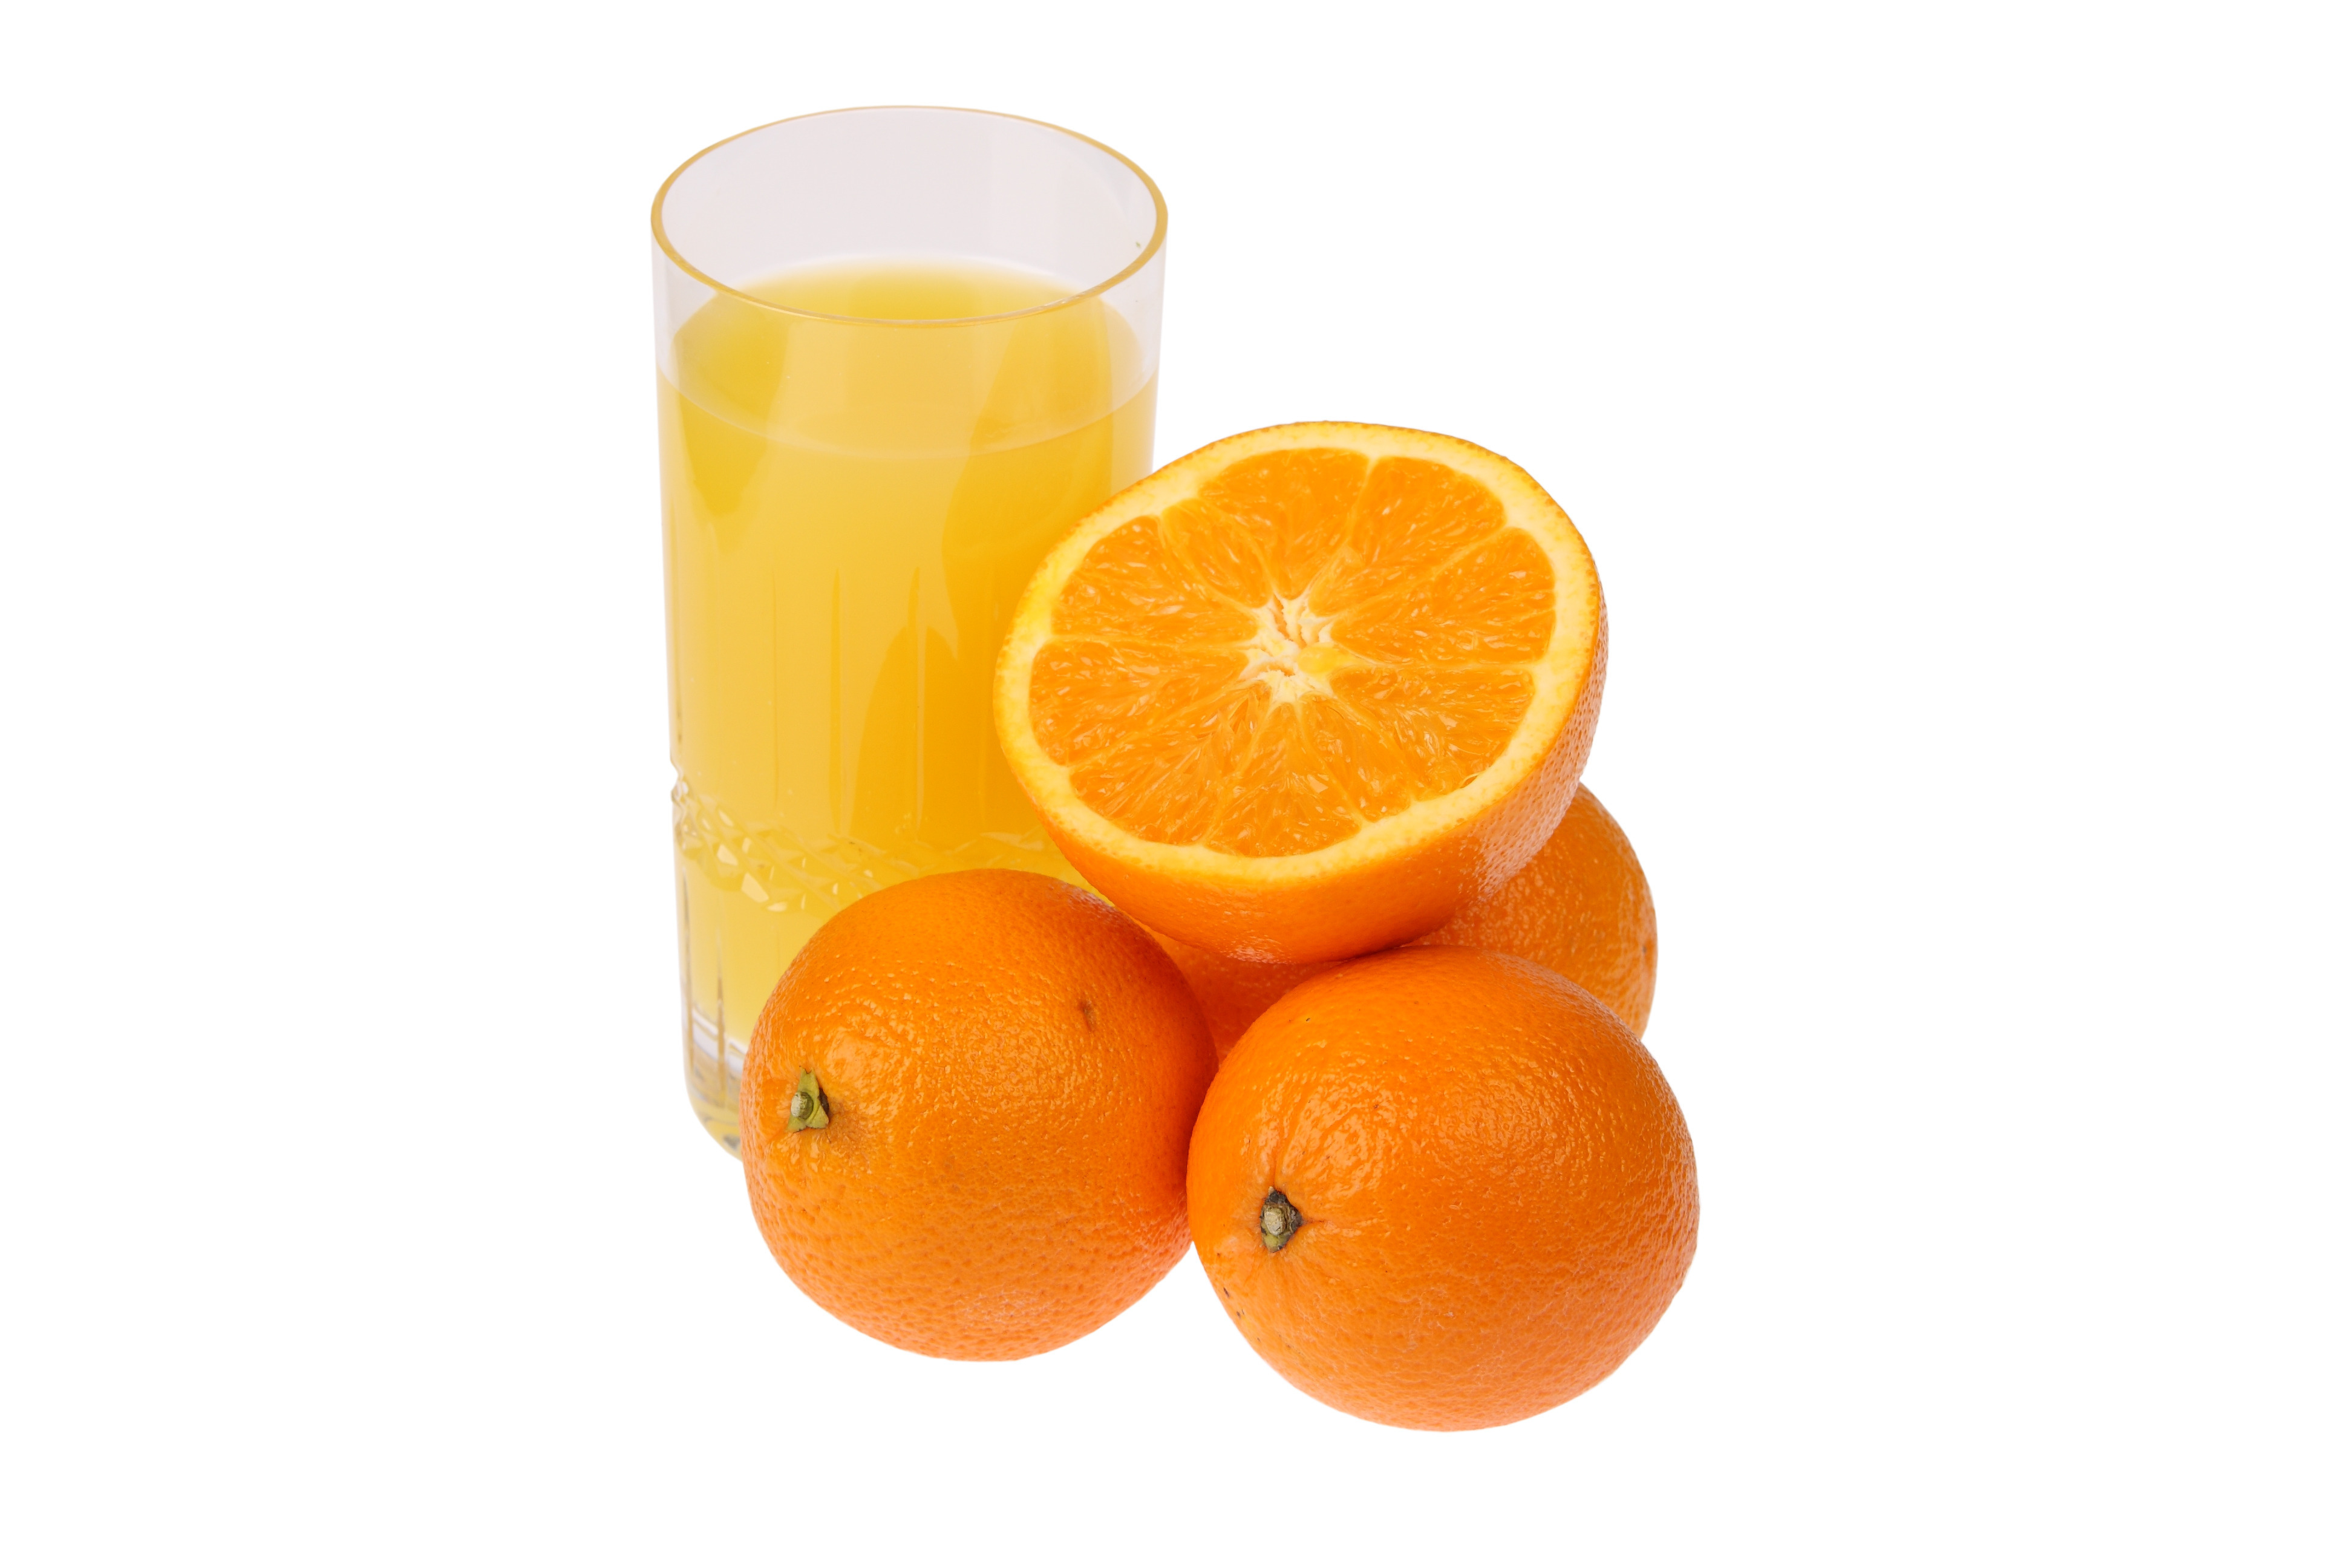 Orange juice in glass and fresh orange fruits - Cut out